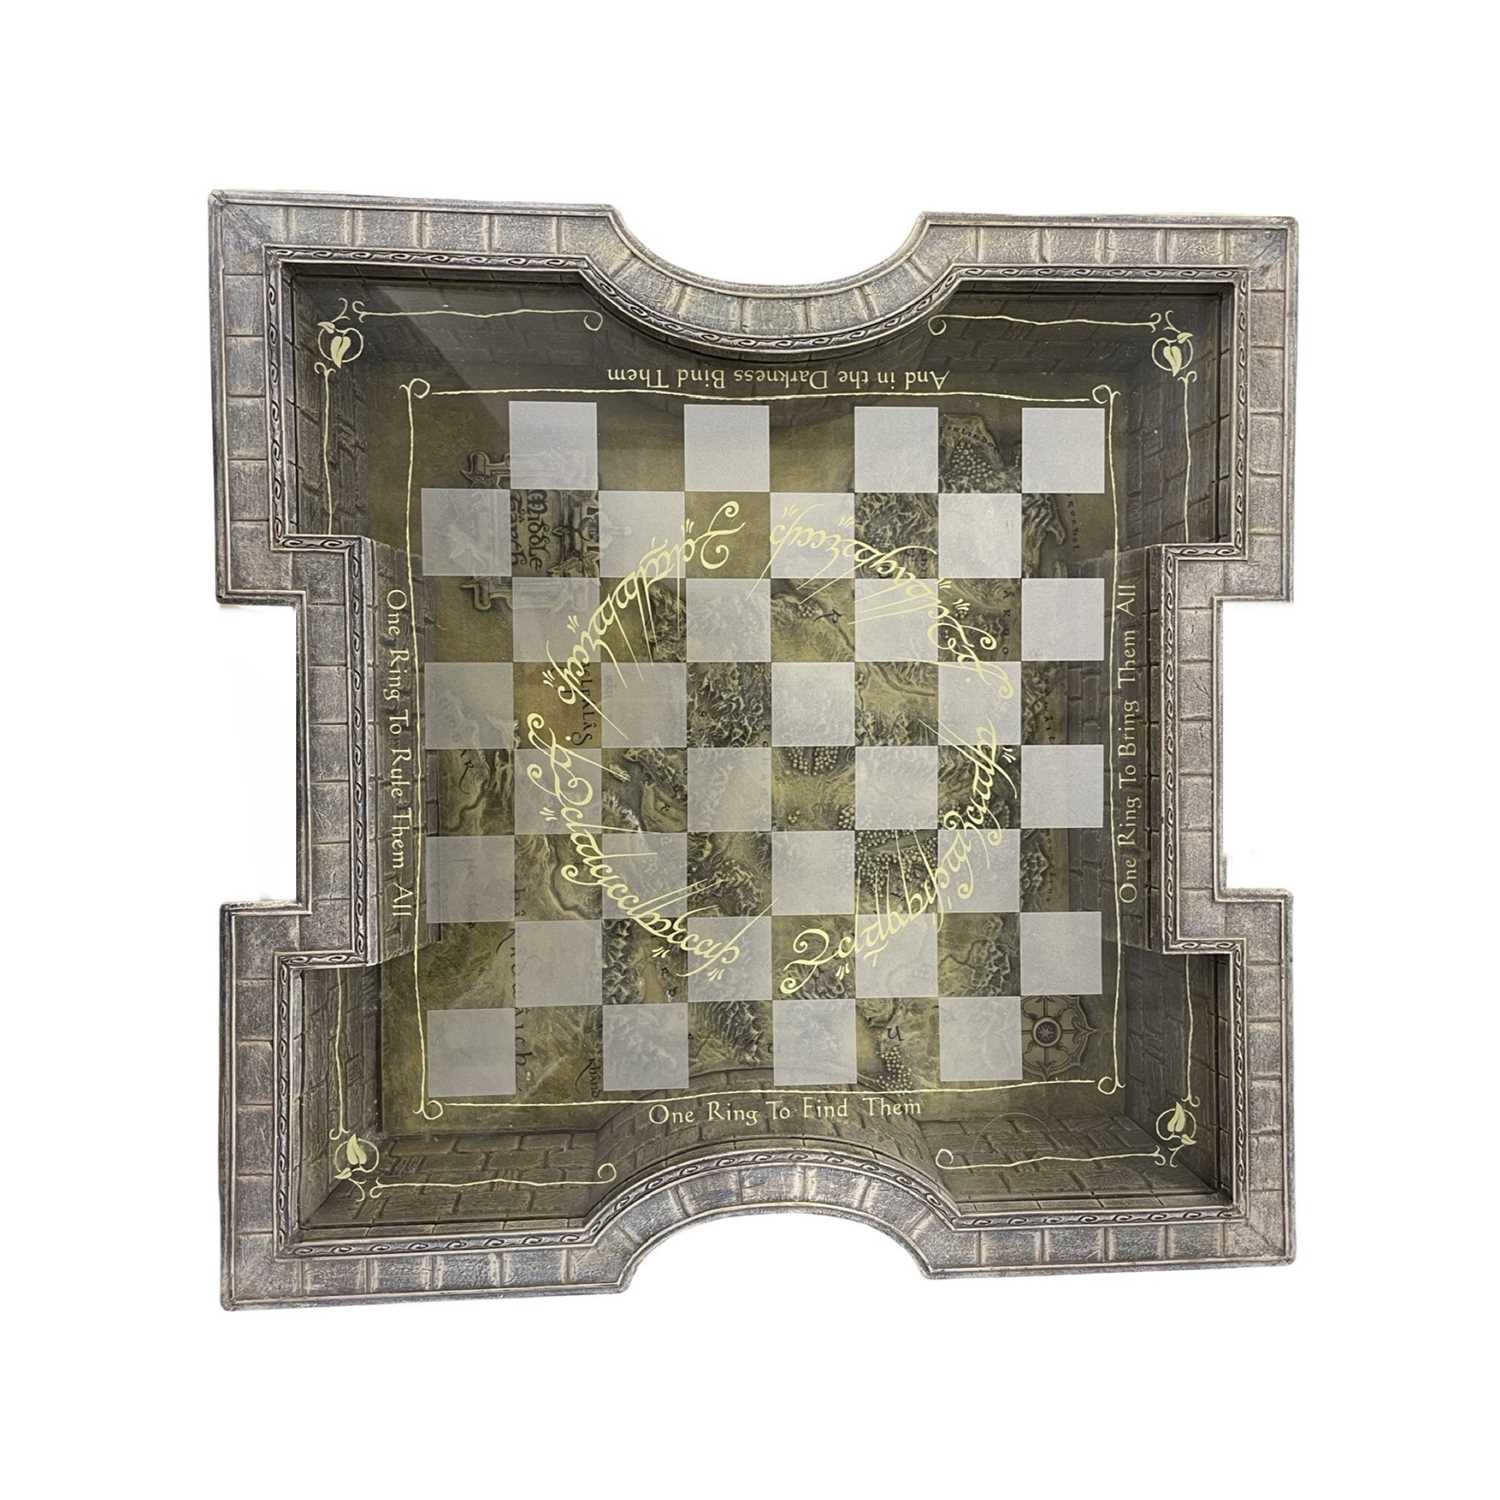 A Collector's Edition Lord of the Rings chess set by Noble, with highly detailed raised board and - Image 3 of 6